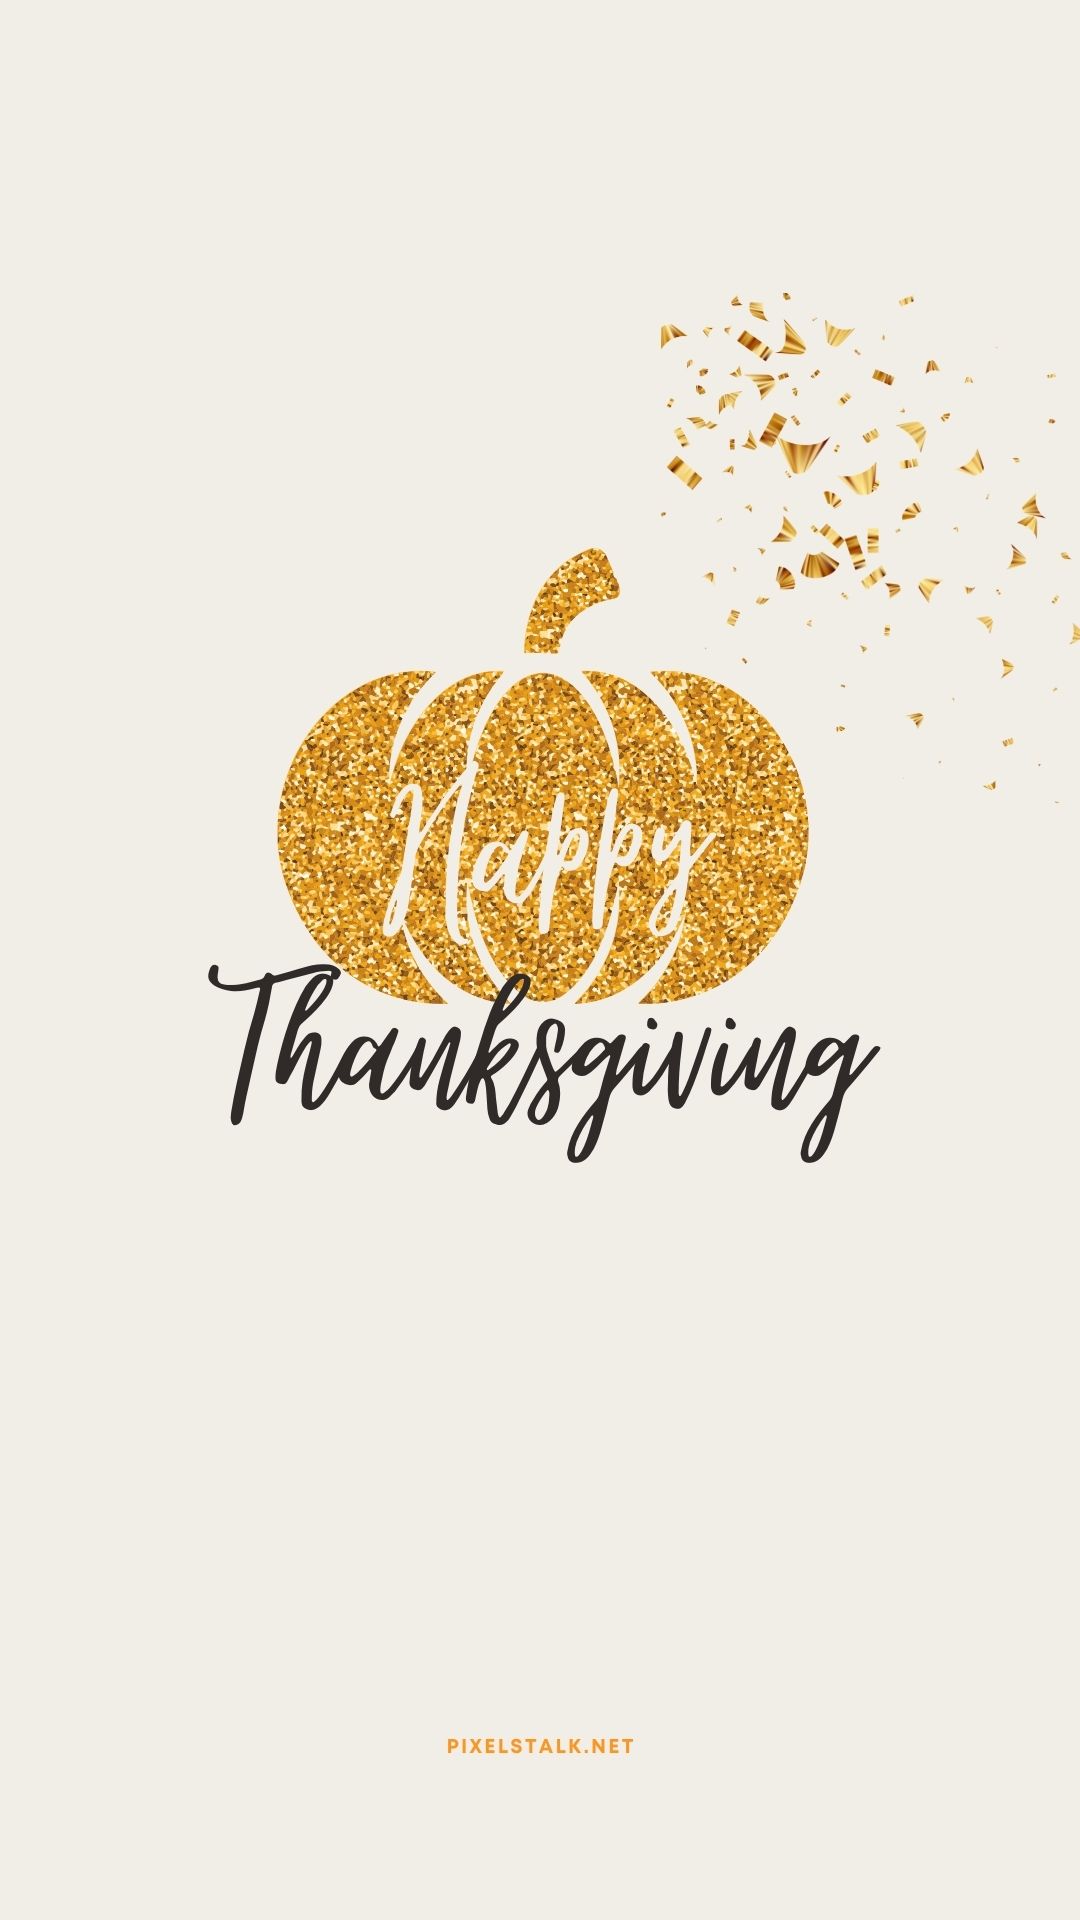 GIVE THANKS  Thanksgiving iphone wallpaper Thanksgiving wallpaper  November wallpaper